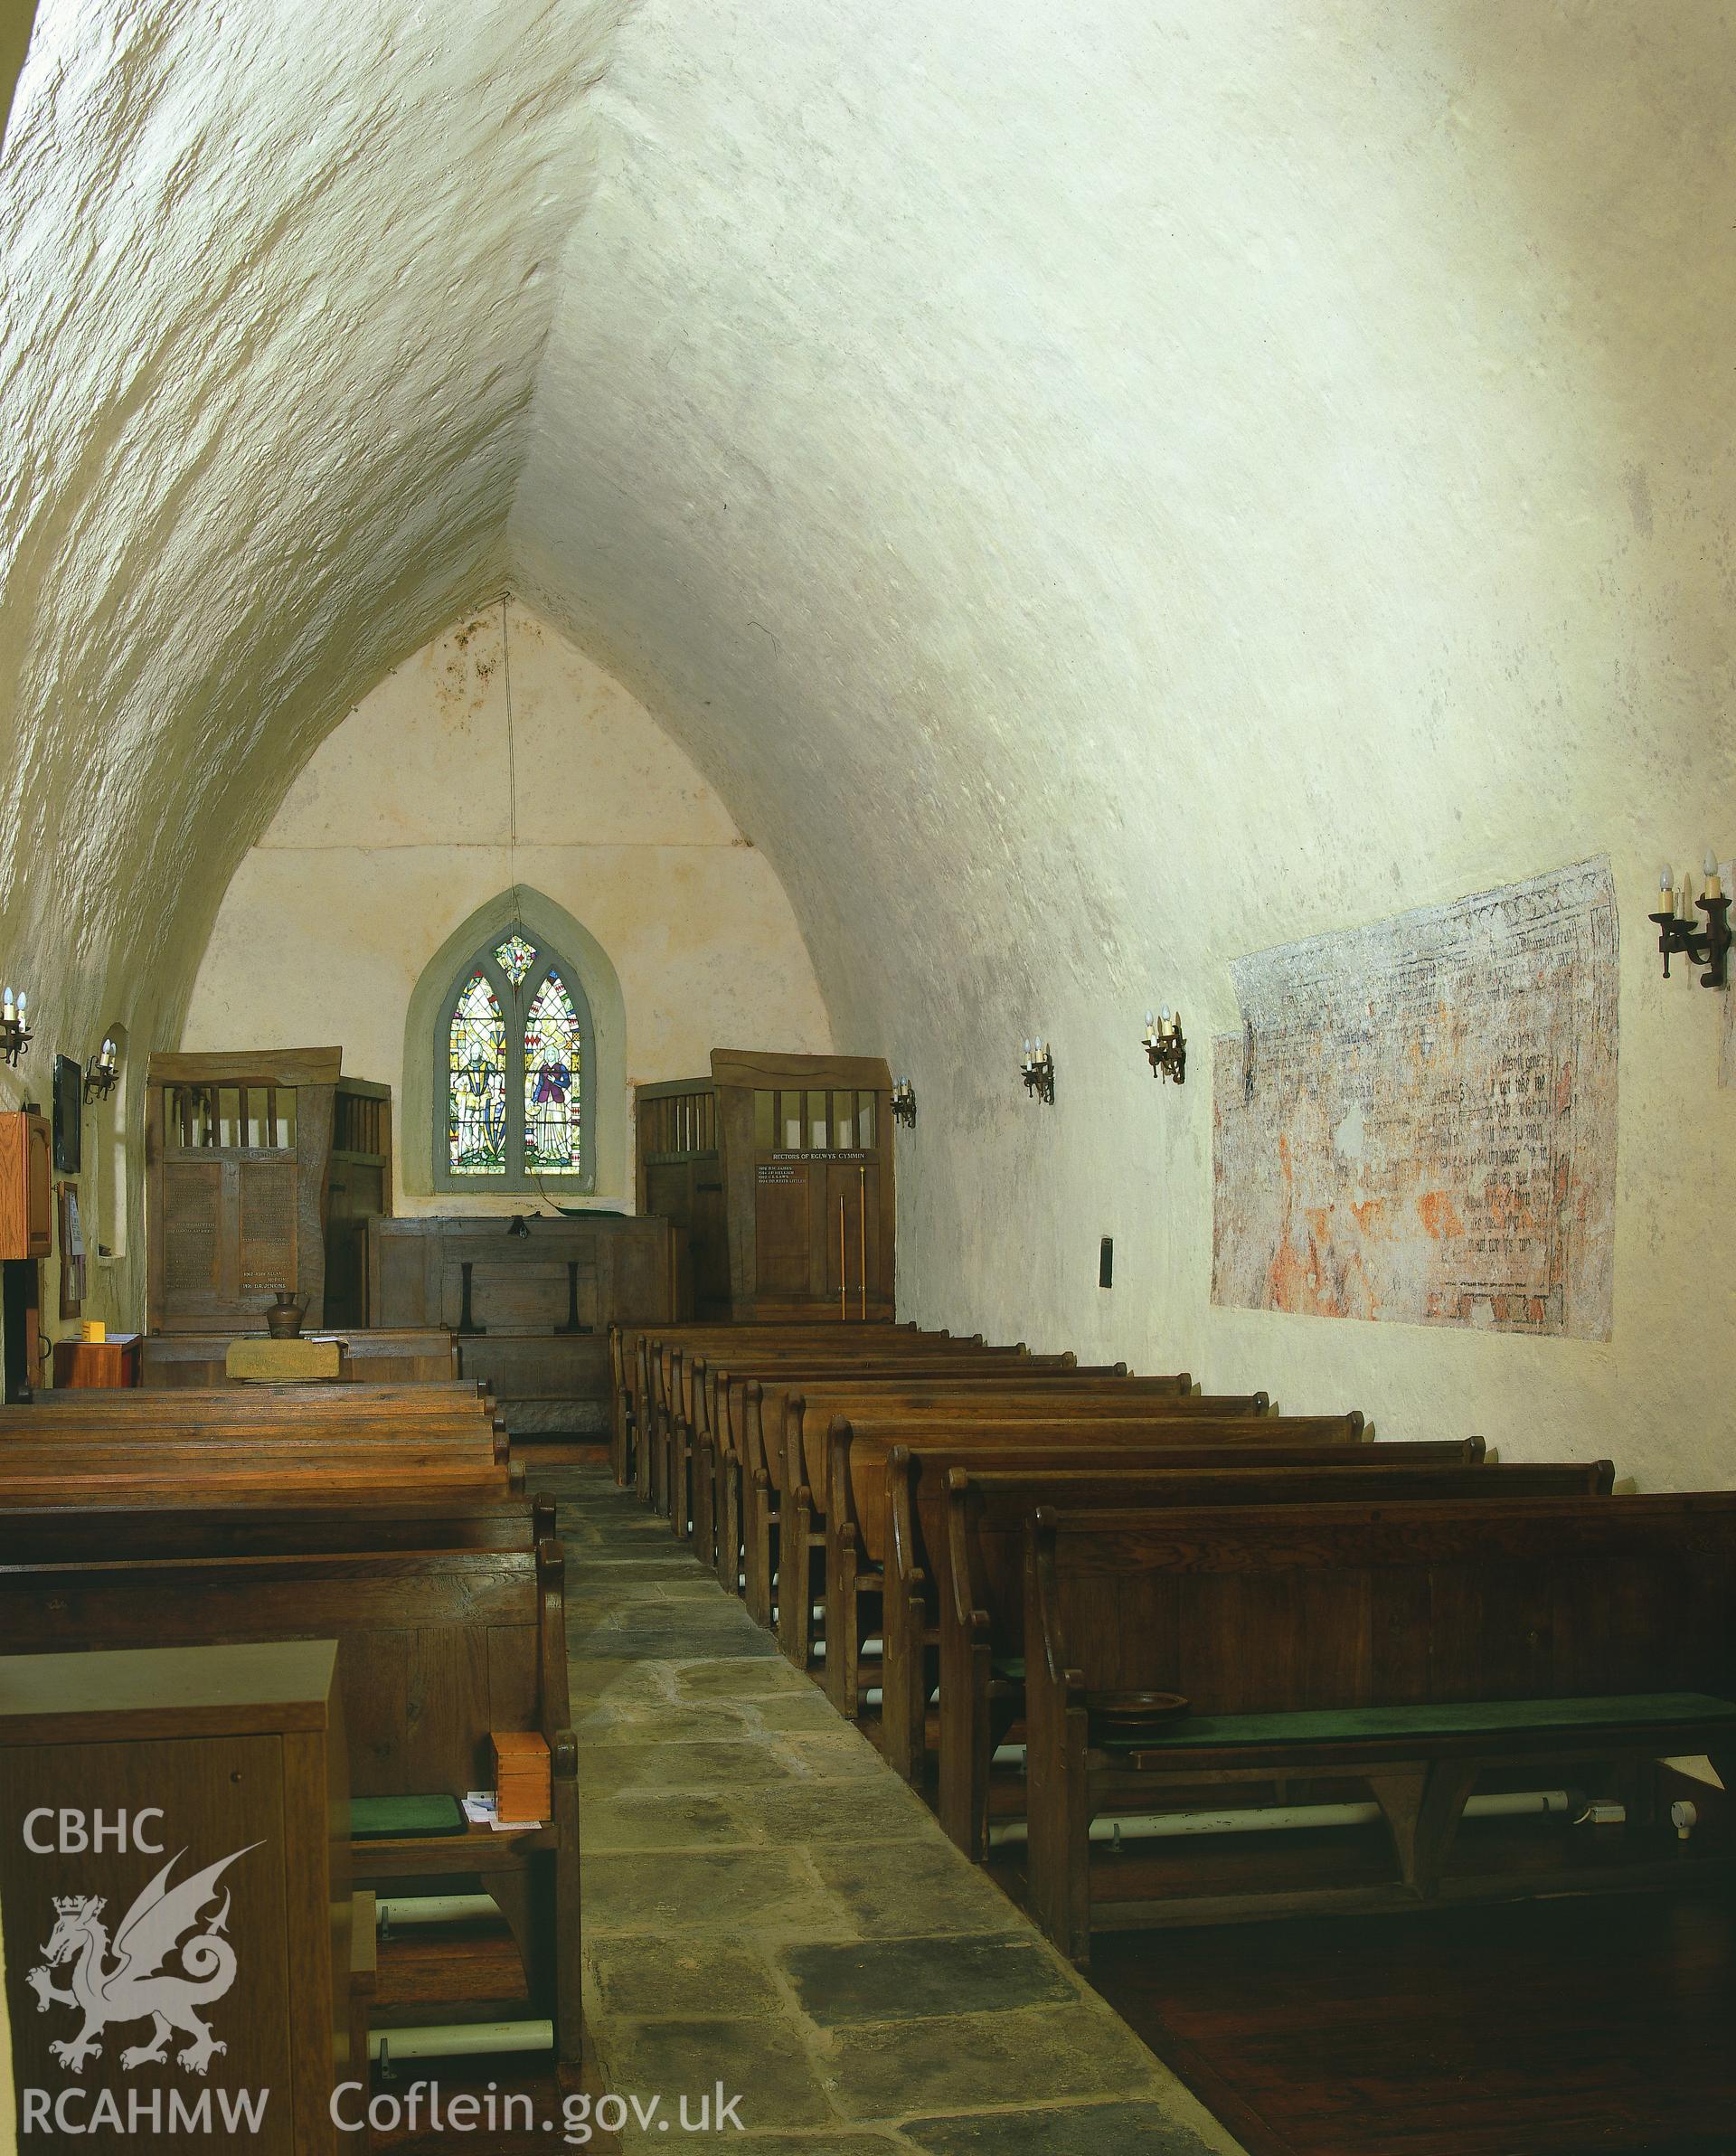 RCAHMW colour transparency showing interior view of St Cyffig's Church, Eglwyscumin.